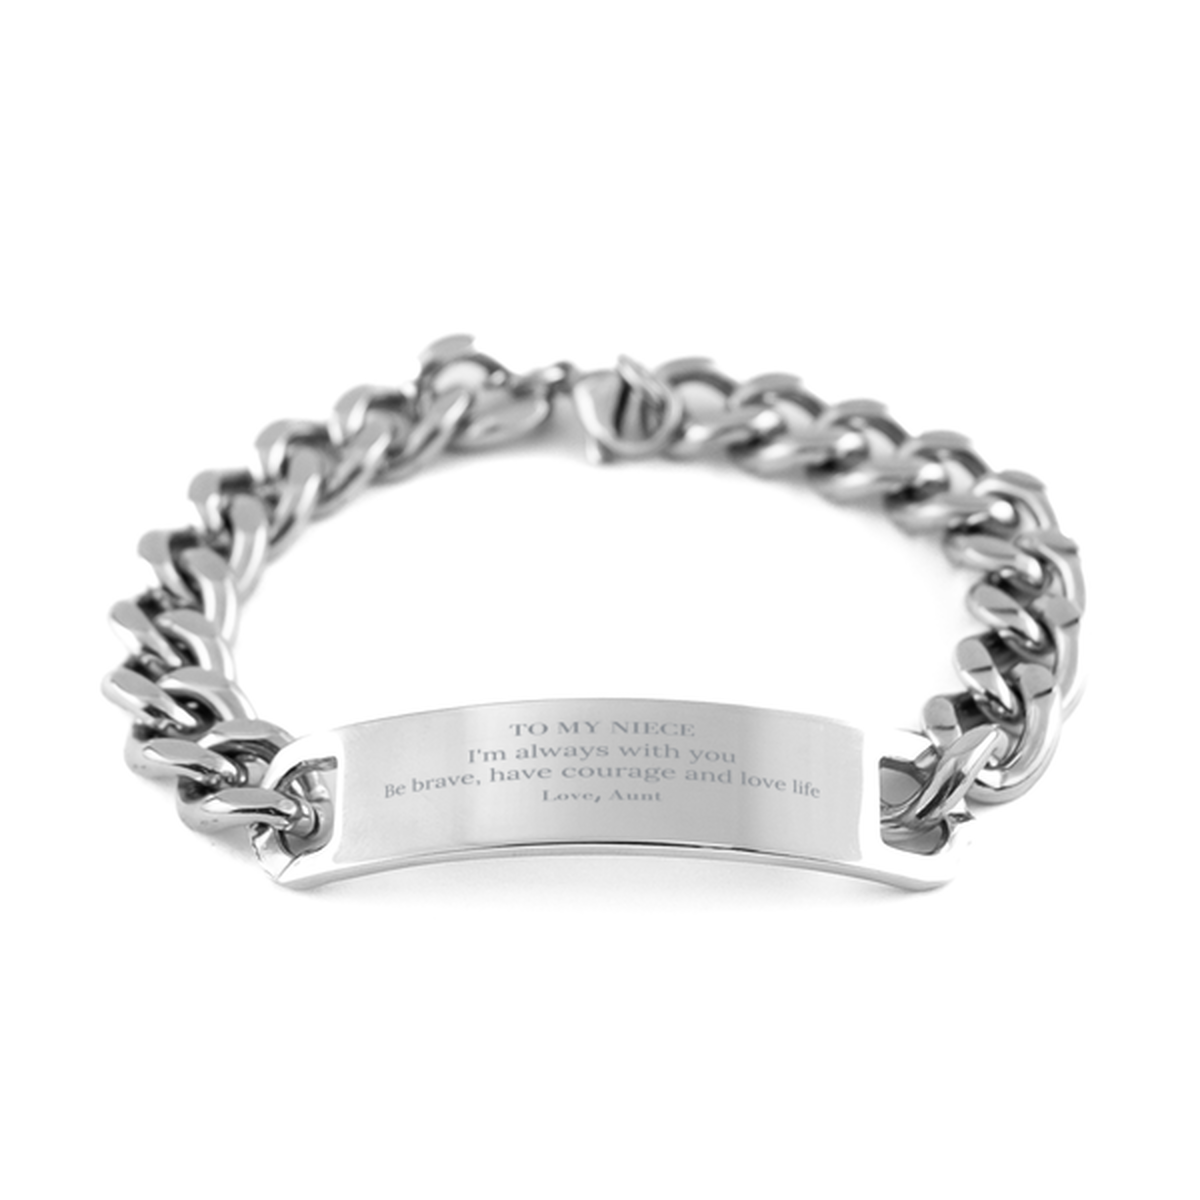 To My Niece Gifts from Aunt, Unique Cuban Chain Stainless Steel Bracelet Inspirational Christmas Birthday Graduation Gifts for Niece I'm always with you. Be brave, have courage and love life. Love, Aunt